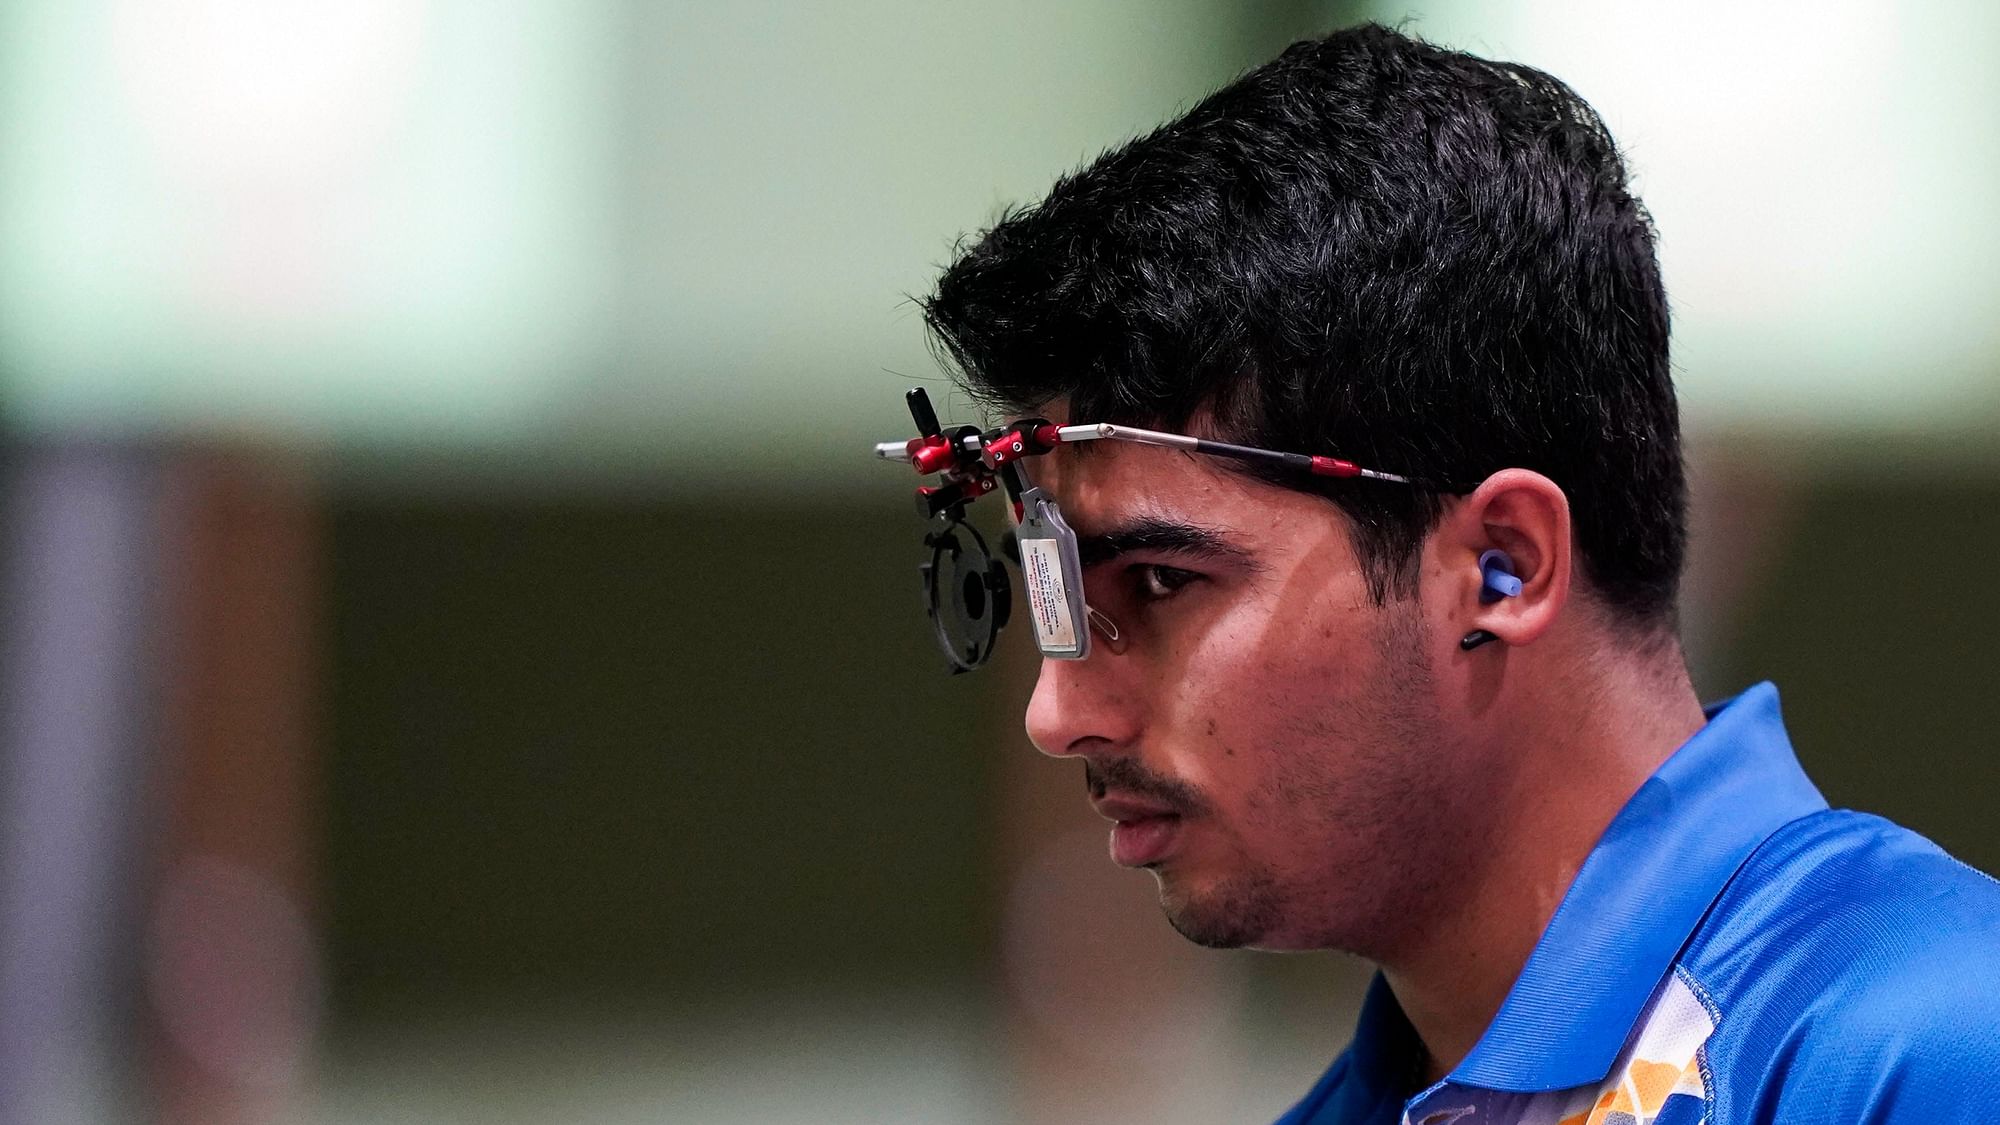 <div class="paragraphs"><p>Saurabh Chaudhary finished 7th in the final of the 10m Air Pistol Event in Tokyo Olympics&nbsp;</p></div>